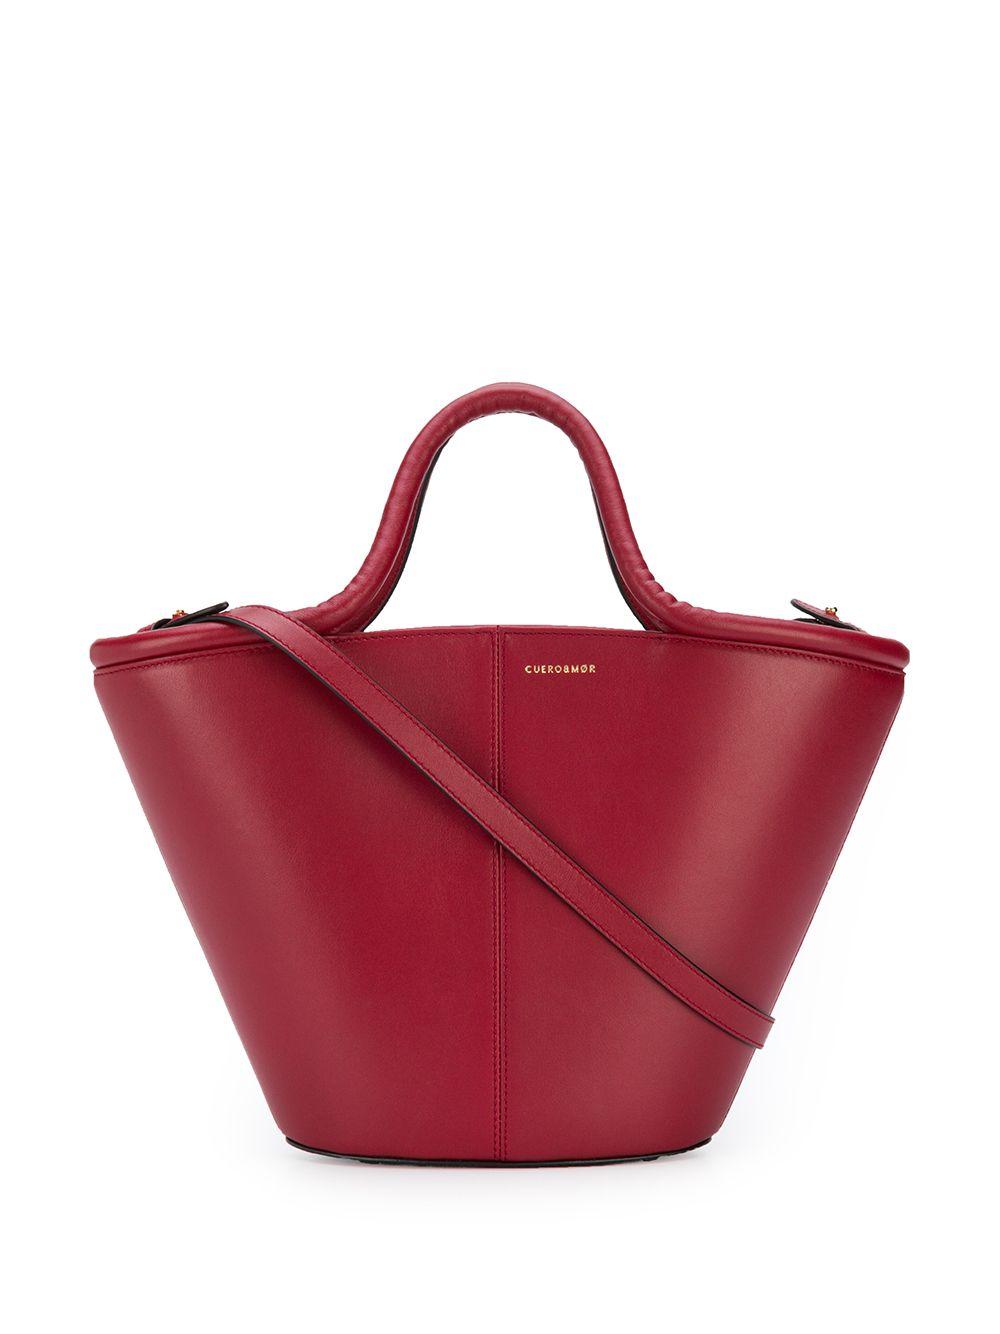 Cuero&Mør Leather Tote Bag in Red - Lyst